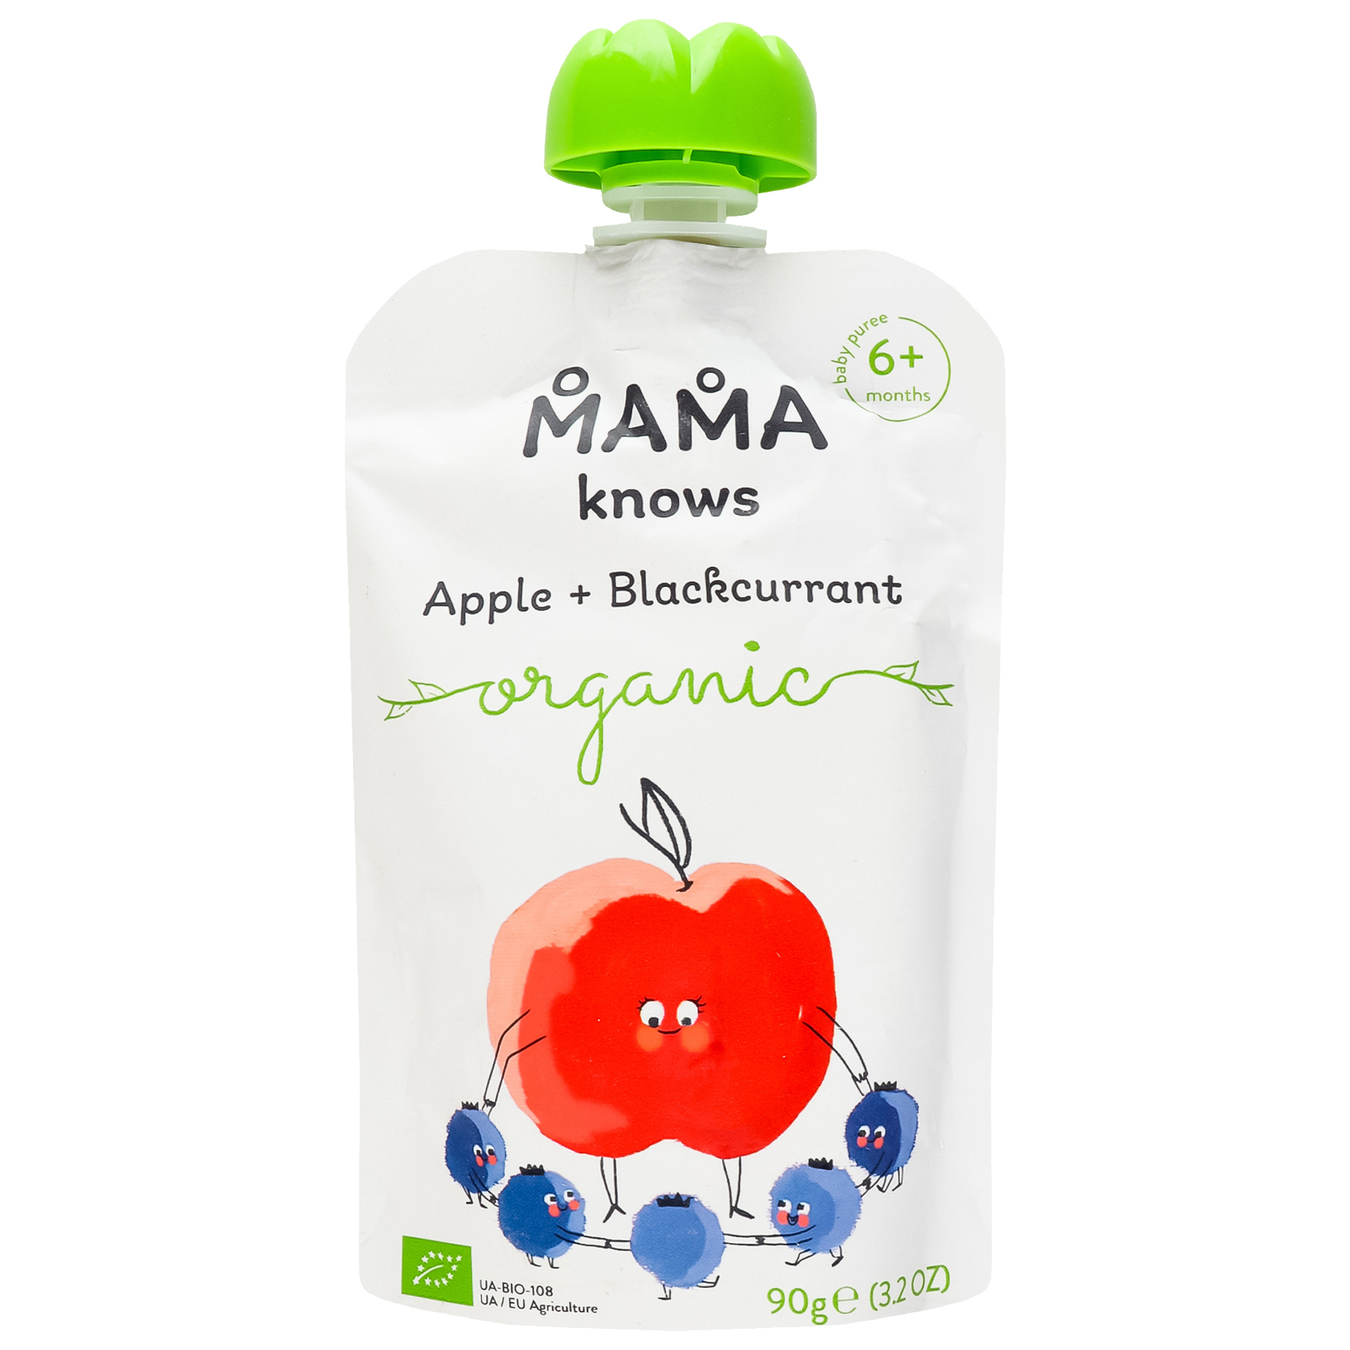 Mama knows apple and blackcurrant puree 90g